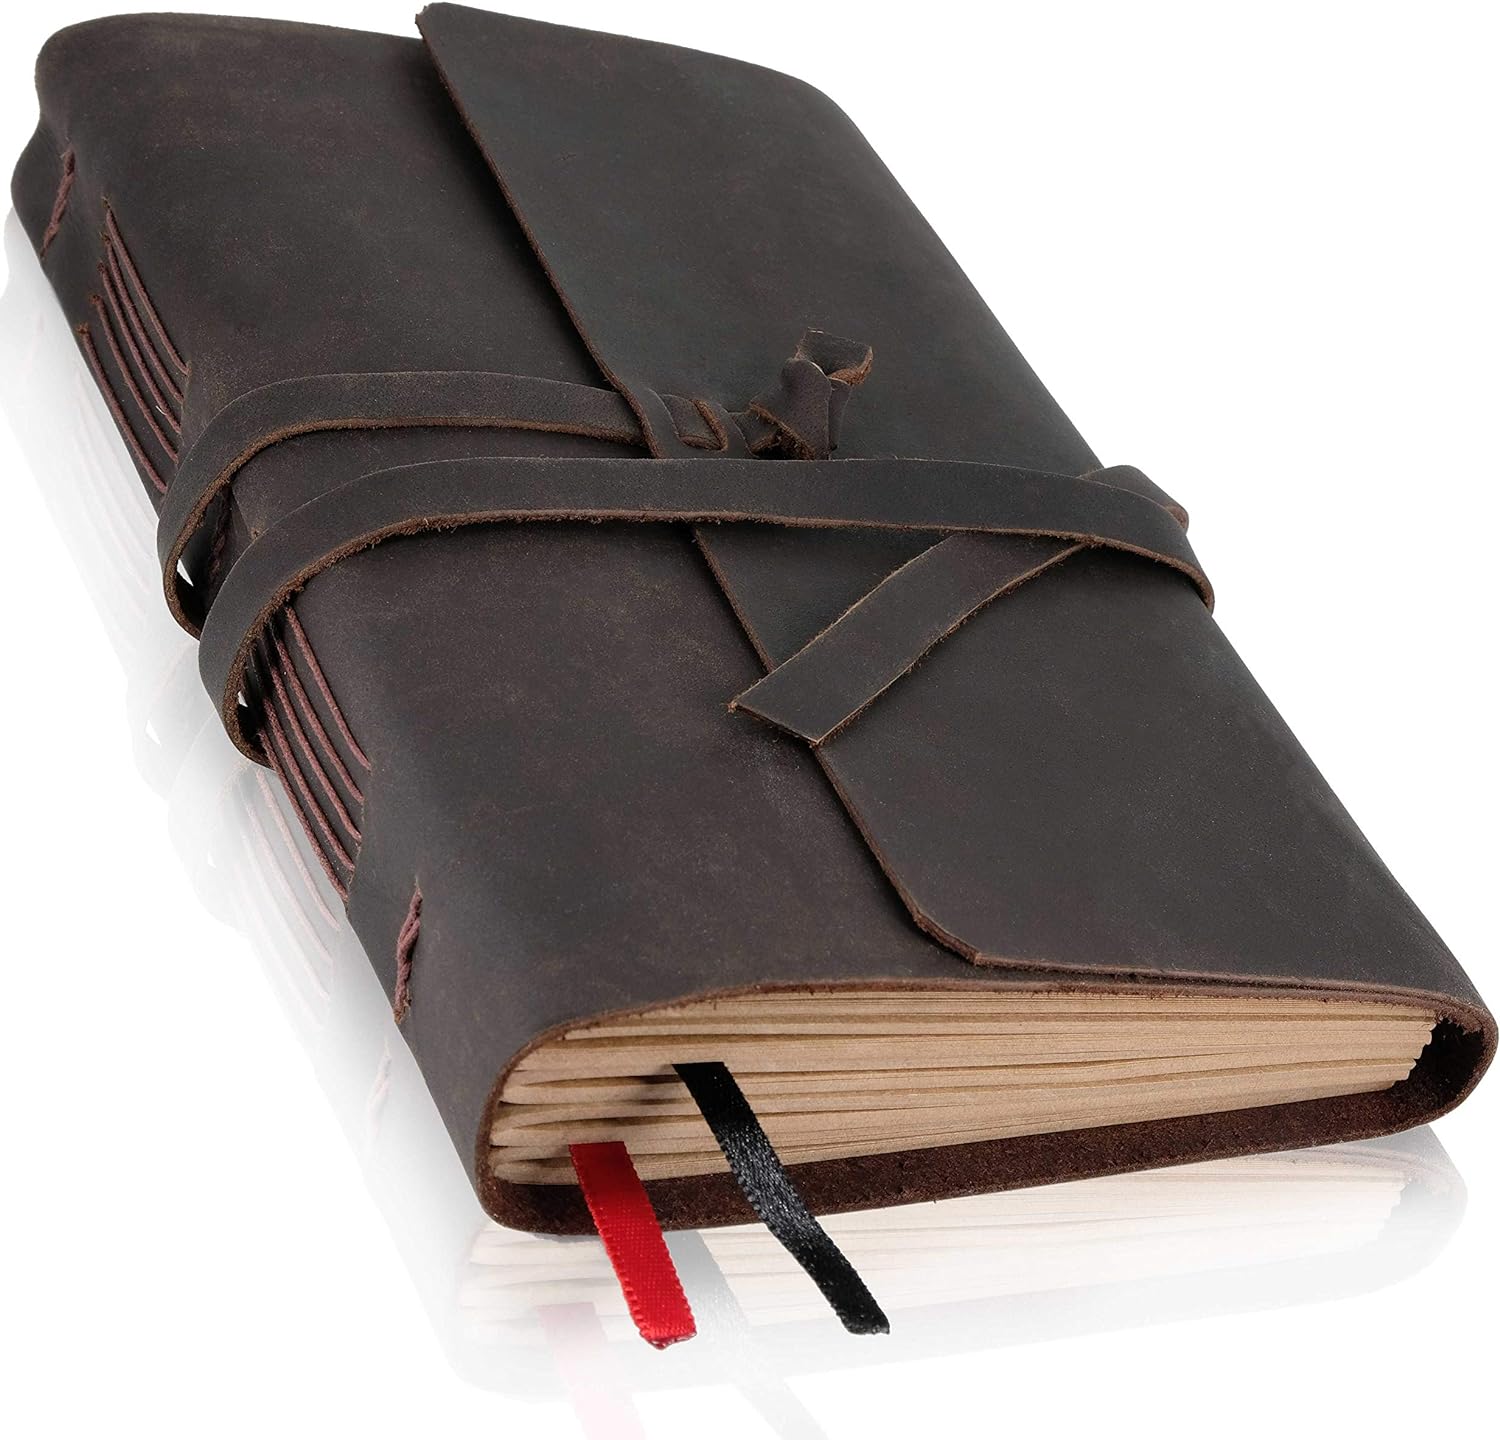 A High-Quality Leather Journal